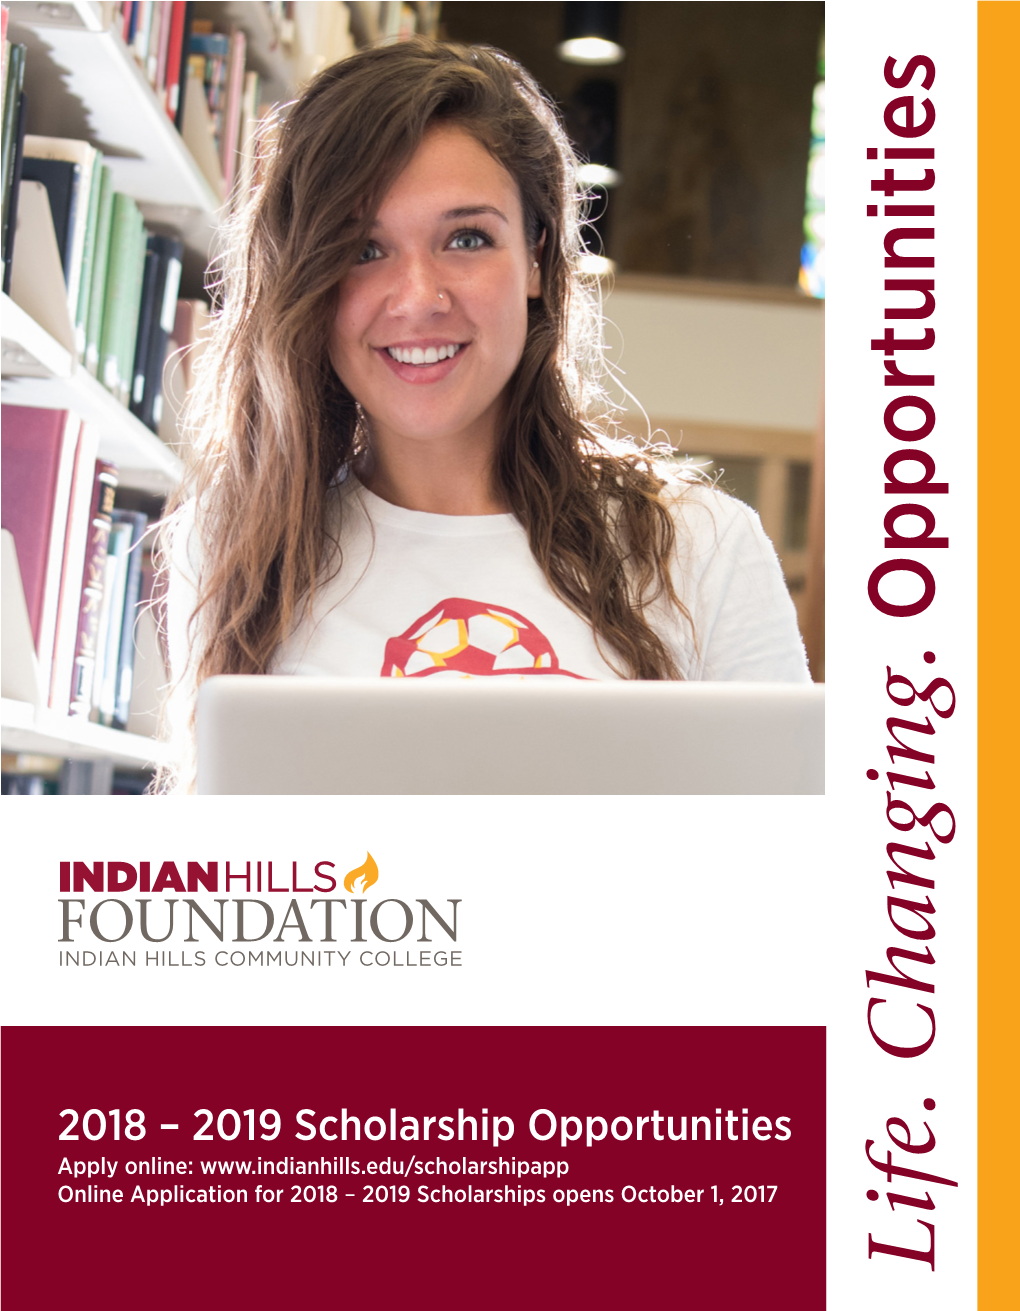 Life. Changing. Opportunities SCHOLARSHIP OPPORTUNITIES at INDIAN HILLS COMMUNITY COLLEGE